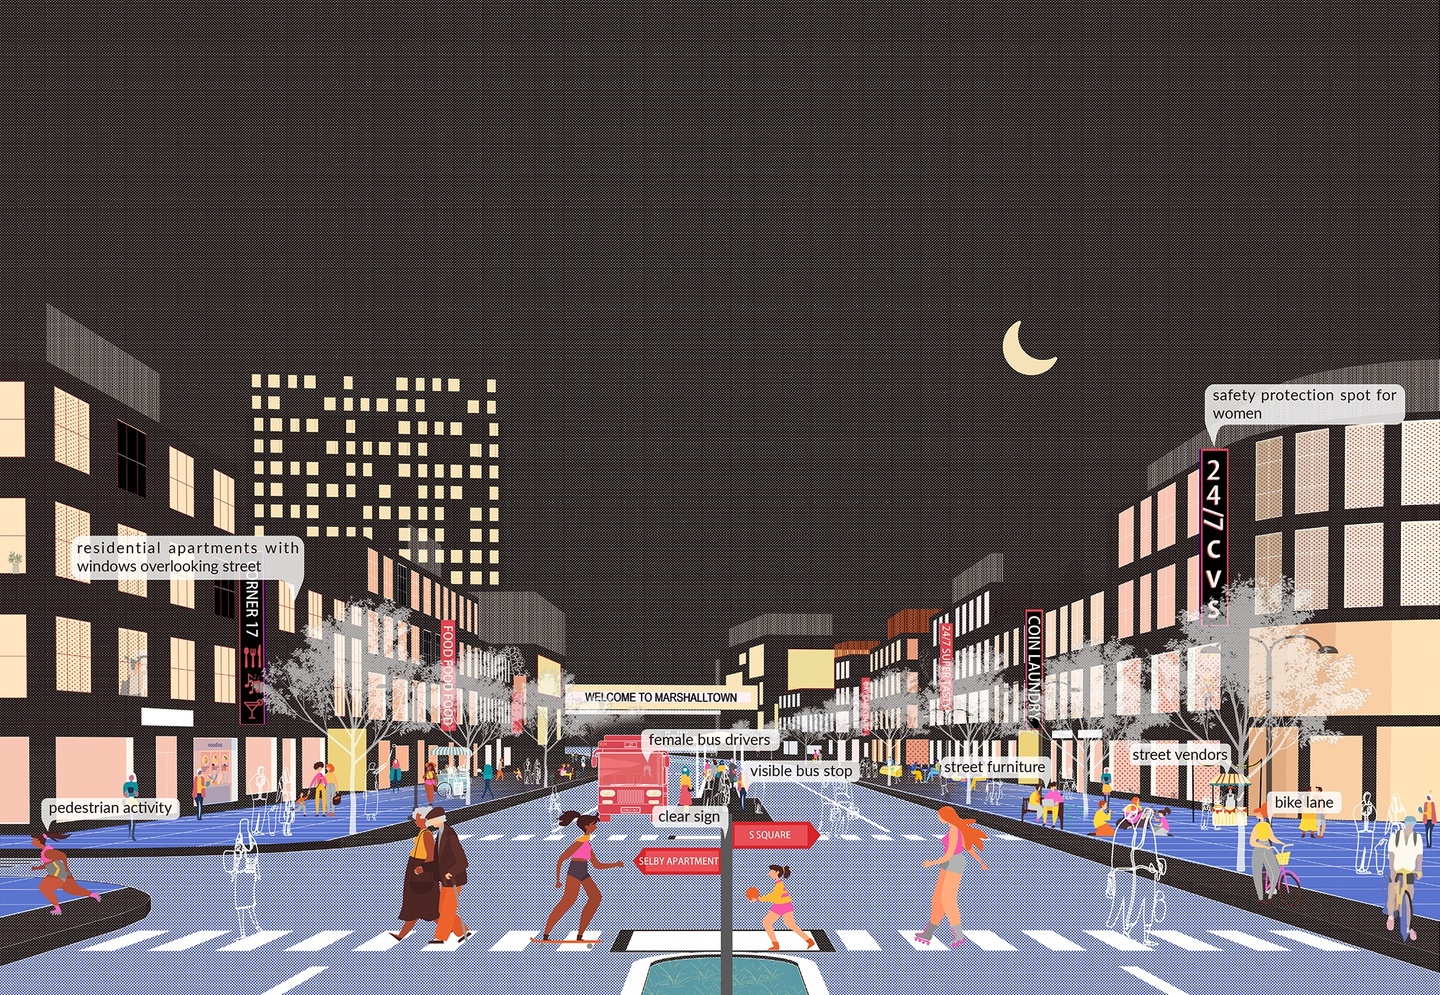 A flat illustration of night-time Marshalltown. Pedestrians are crossing on the zebra-crossing and there are buildings on either side of the street